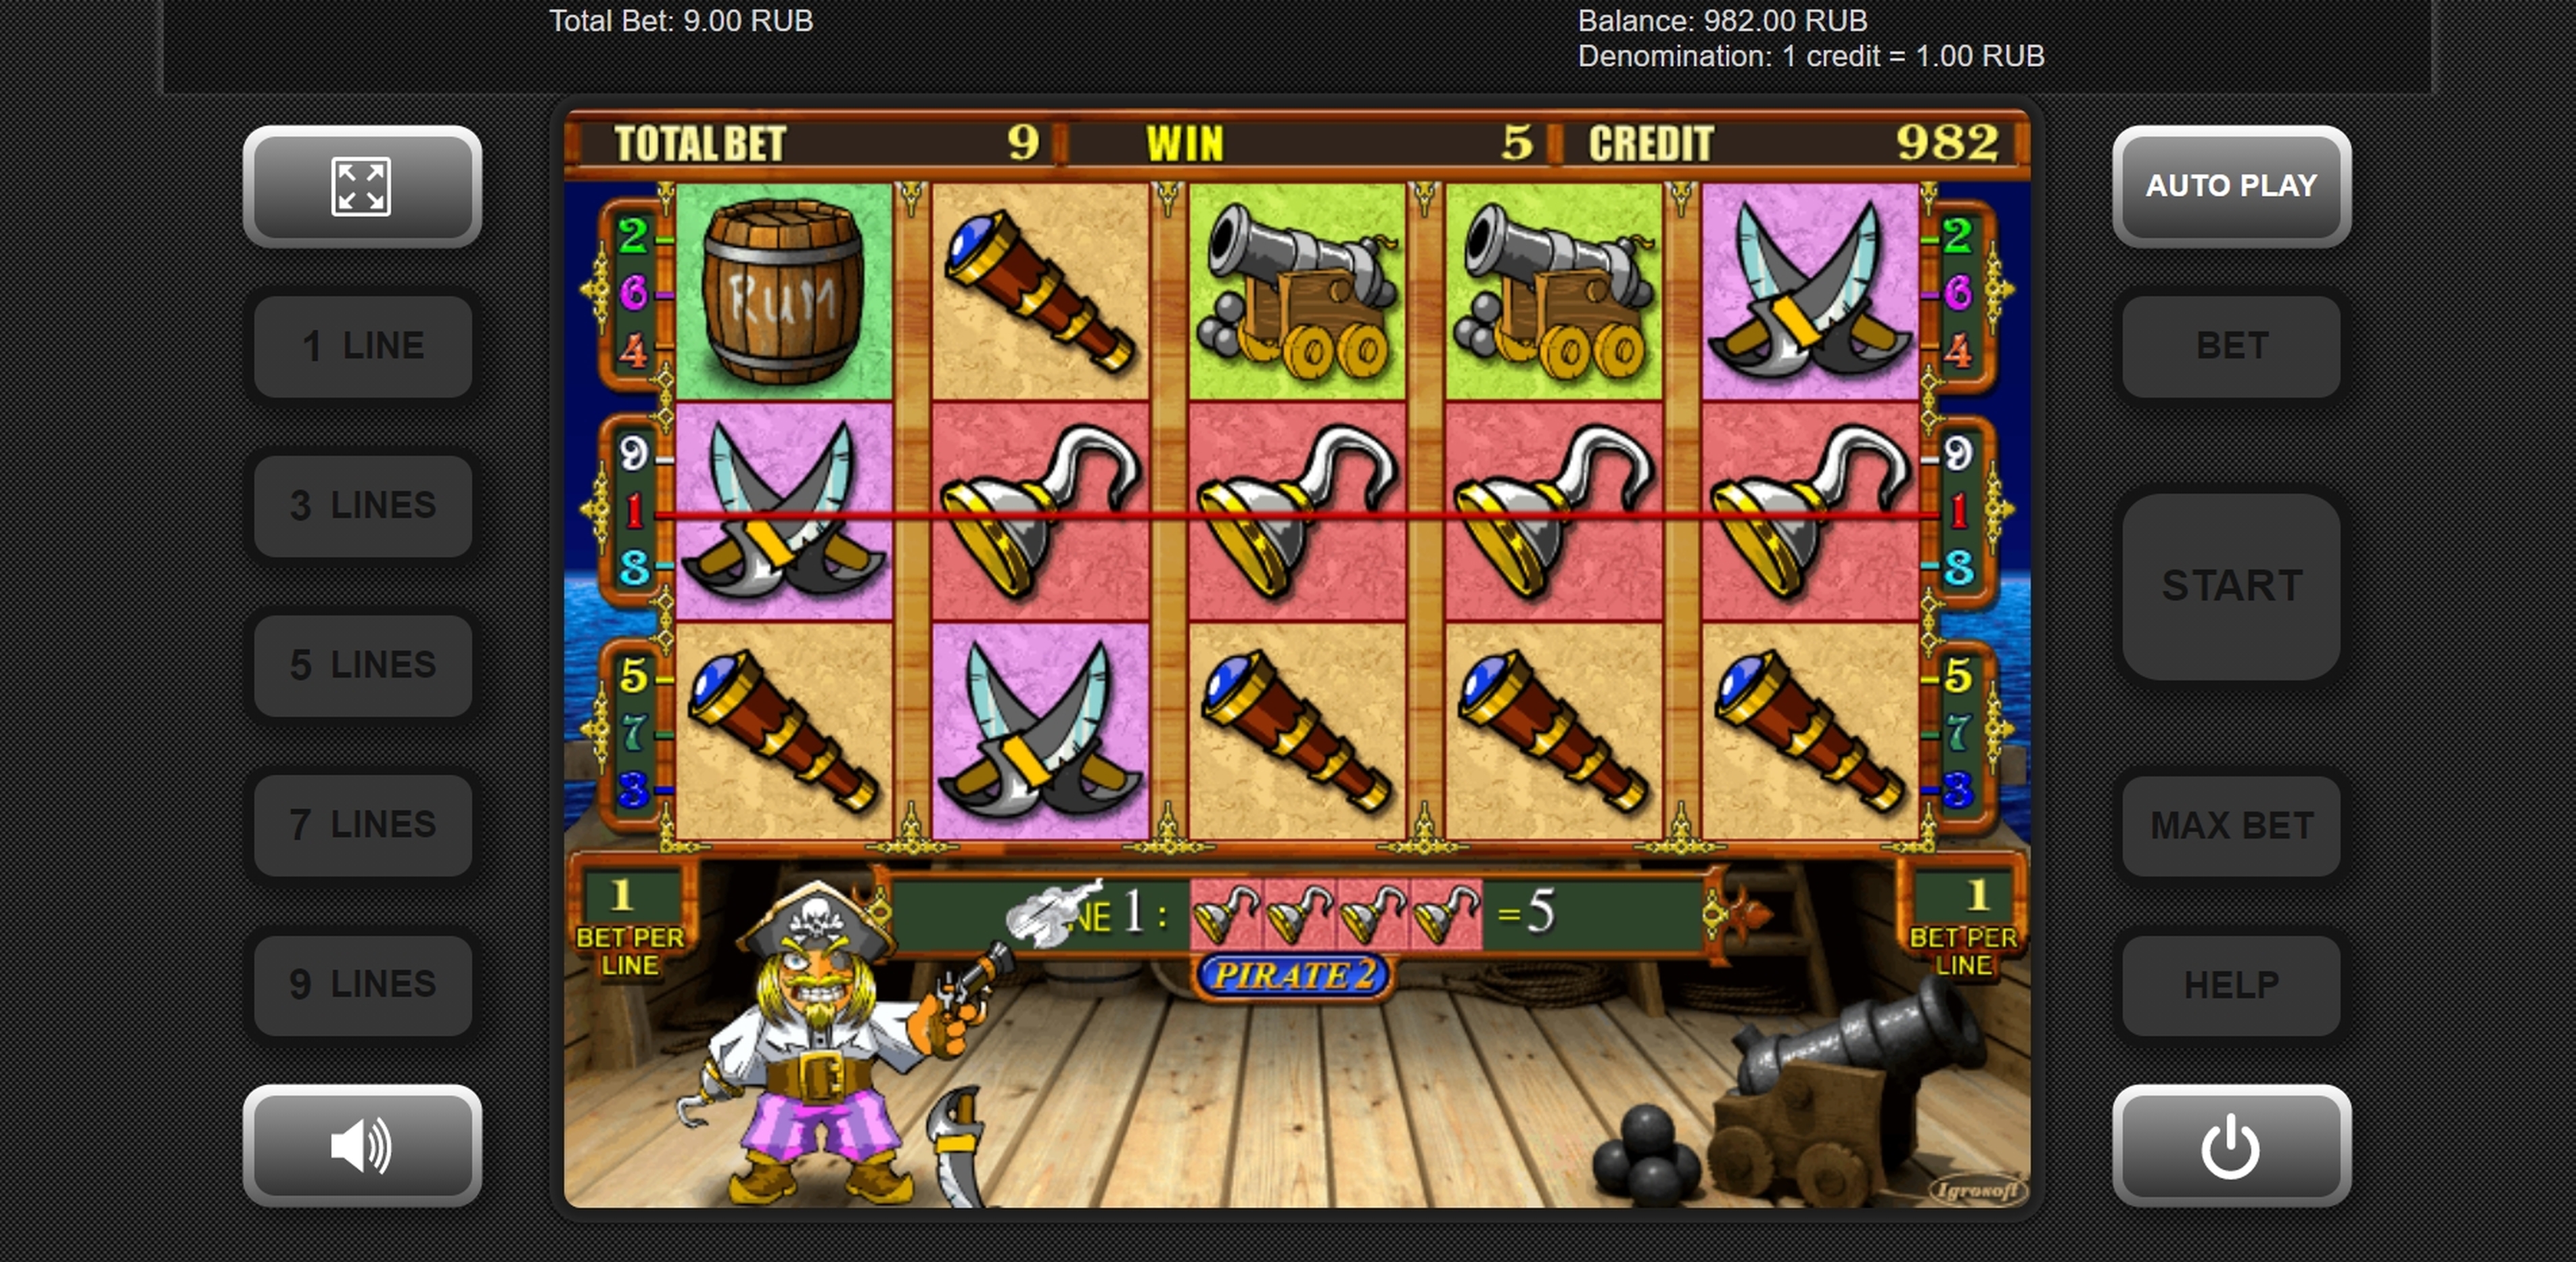 Win Money in Pirate 2 Free Slot Game by Igrosoft